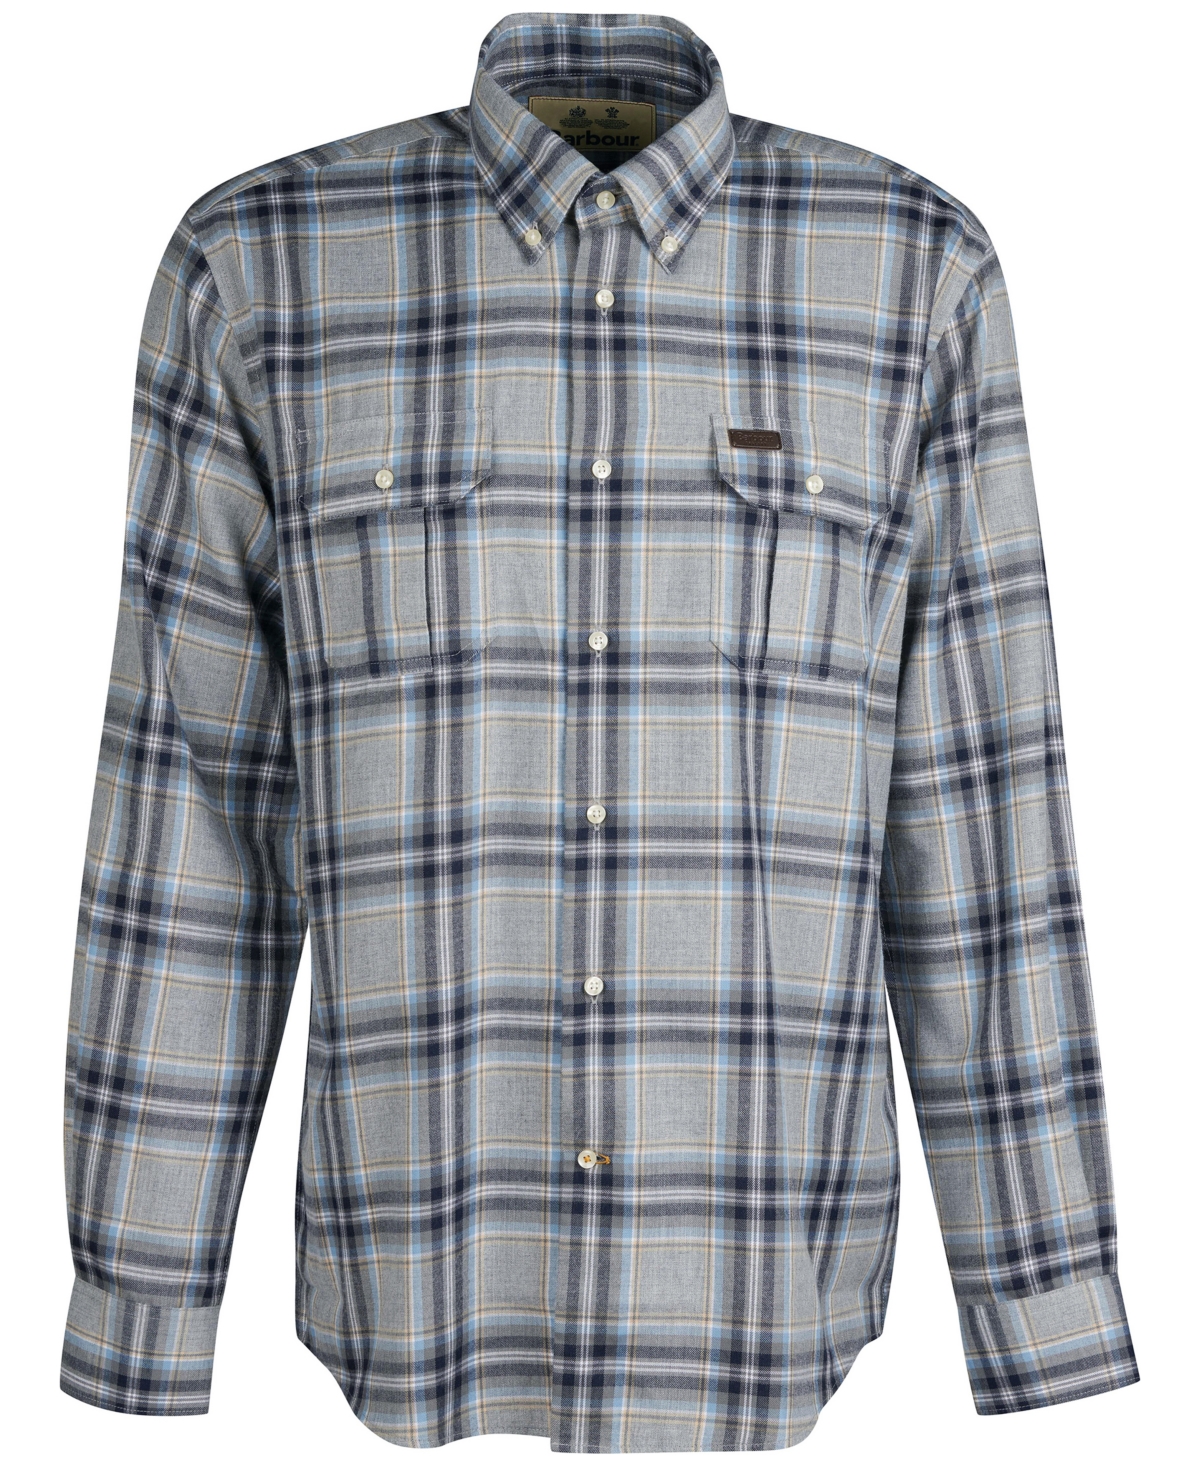 BARBOUR MEN'S SINGSBY TAILORED-FIT TEMPERATURE-REGULATING HIGHLAND CHECK SHIRT